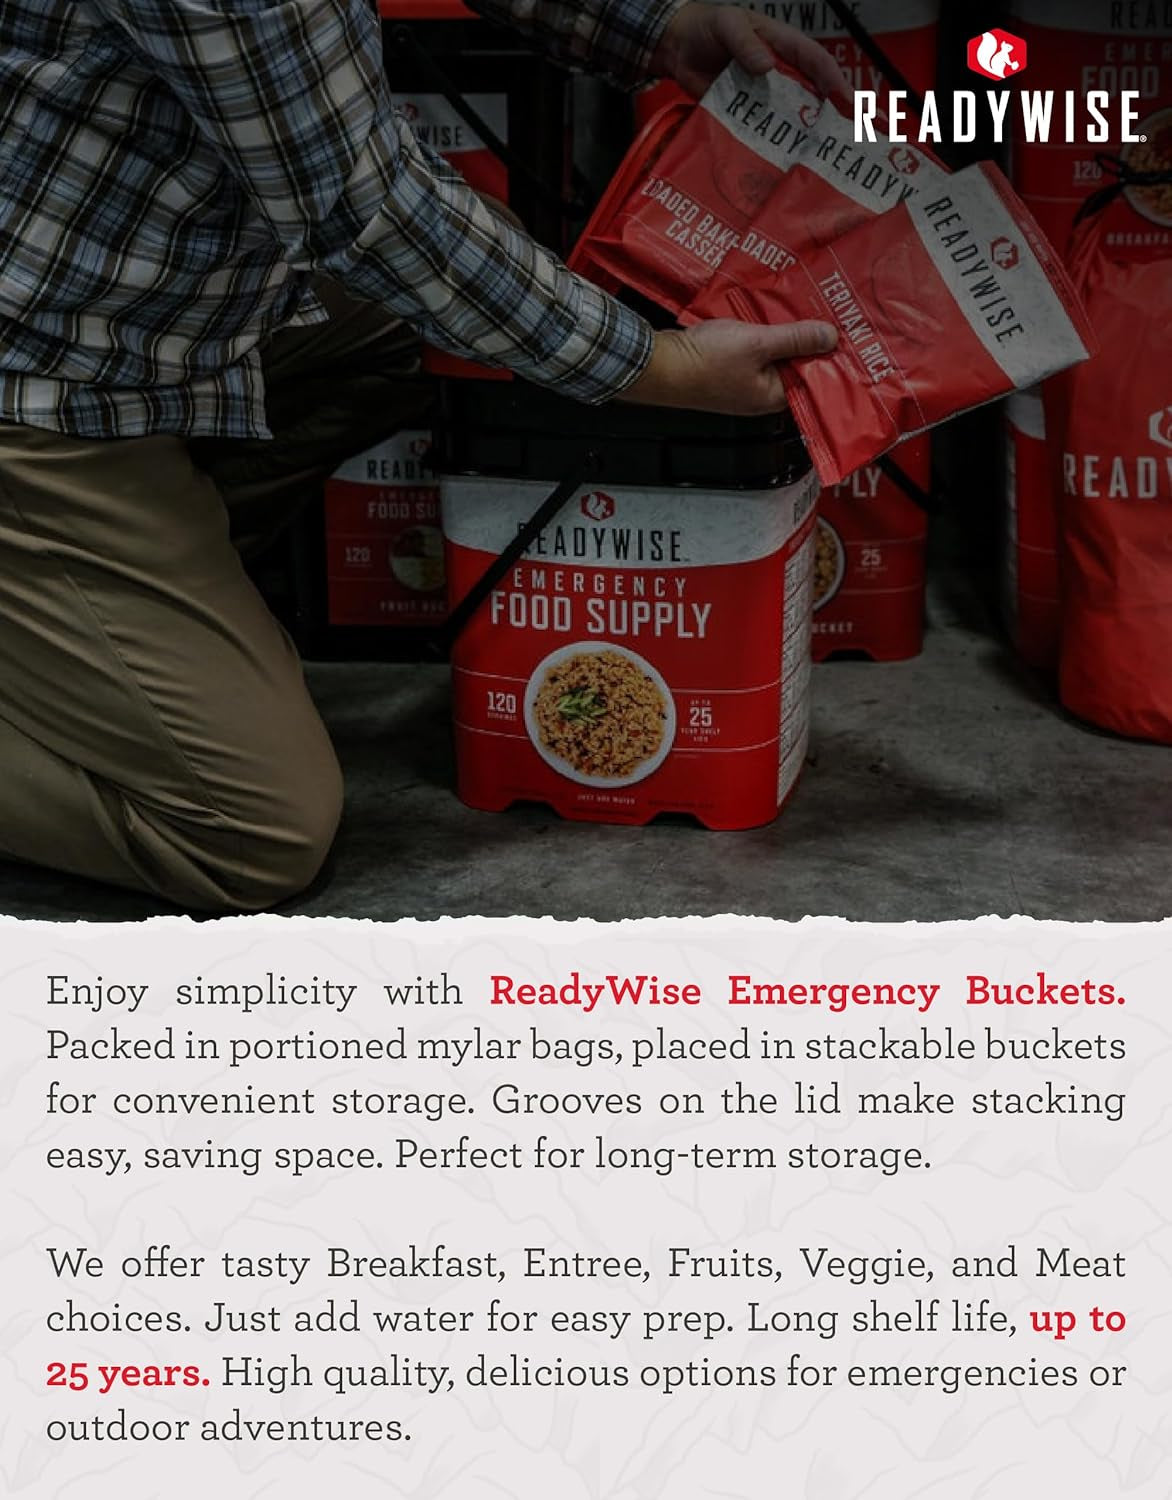 84-Serving Breakfast & Entrée Emergency Food Bucket, Premade Freeze Dried Meals for Camping, Hiking, 25 Year Shelf Life